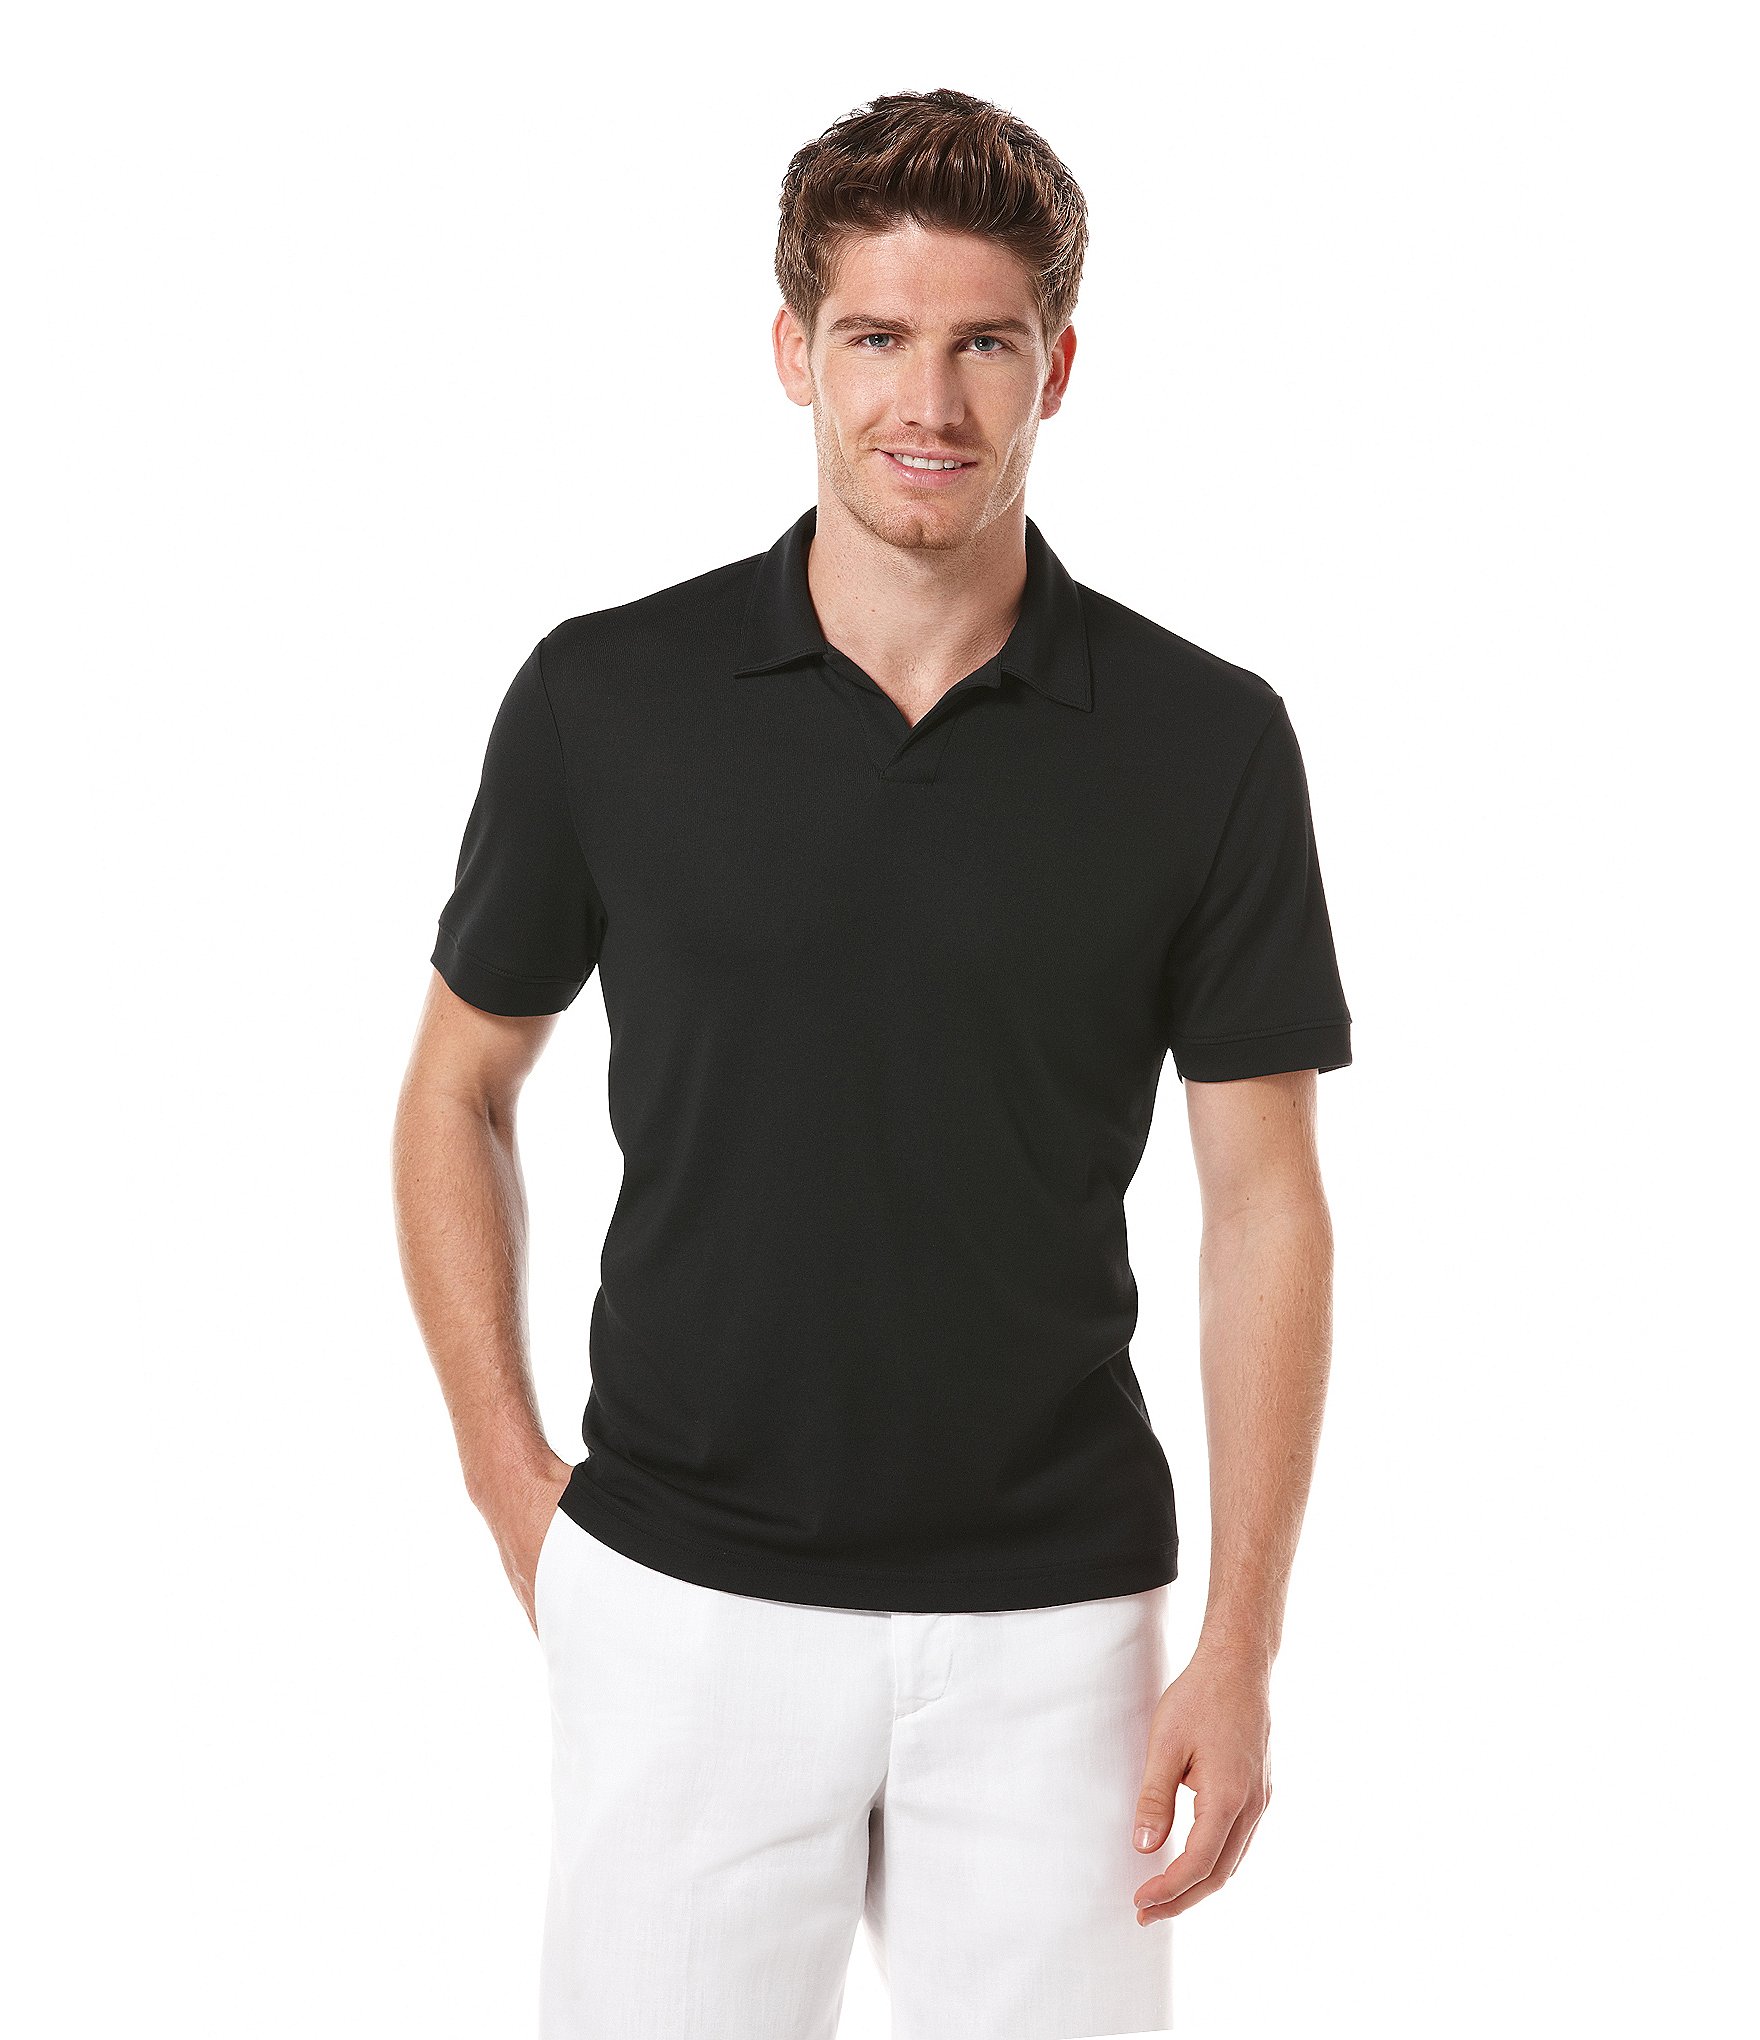 Get the trendy look by sporting men’s polo shirt